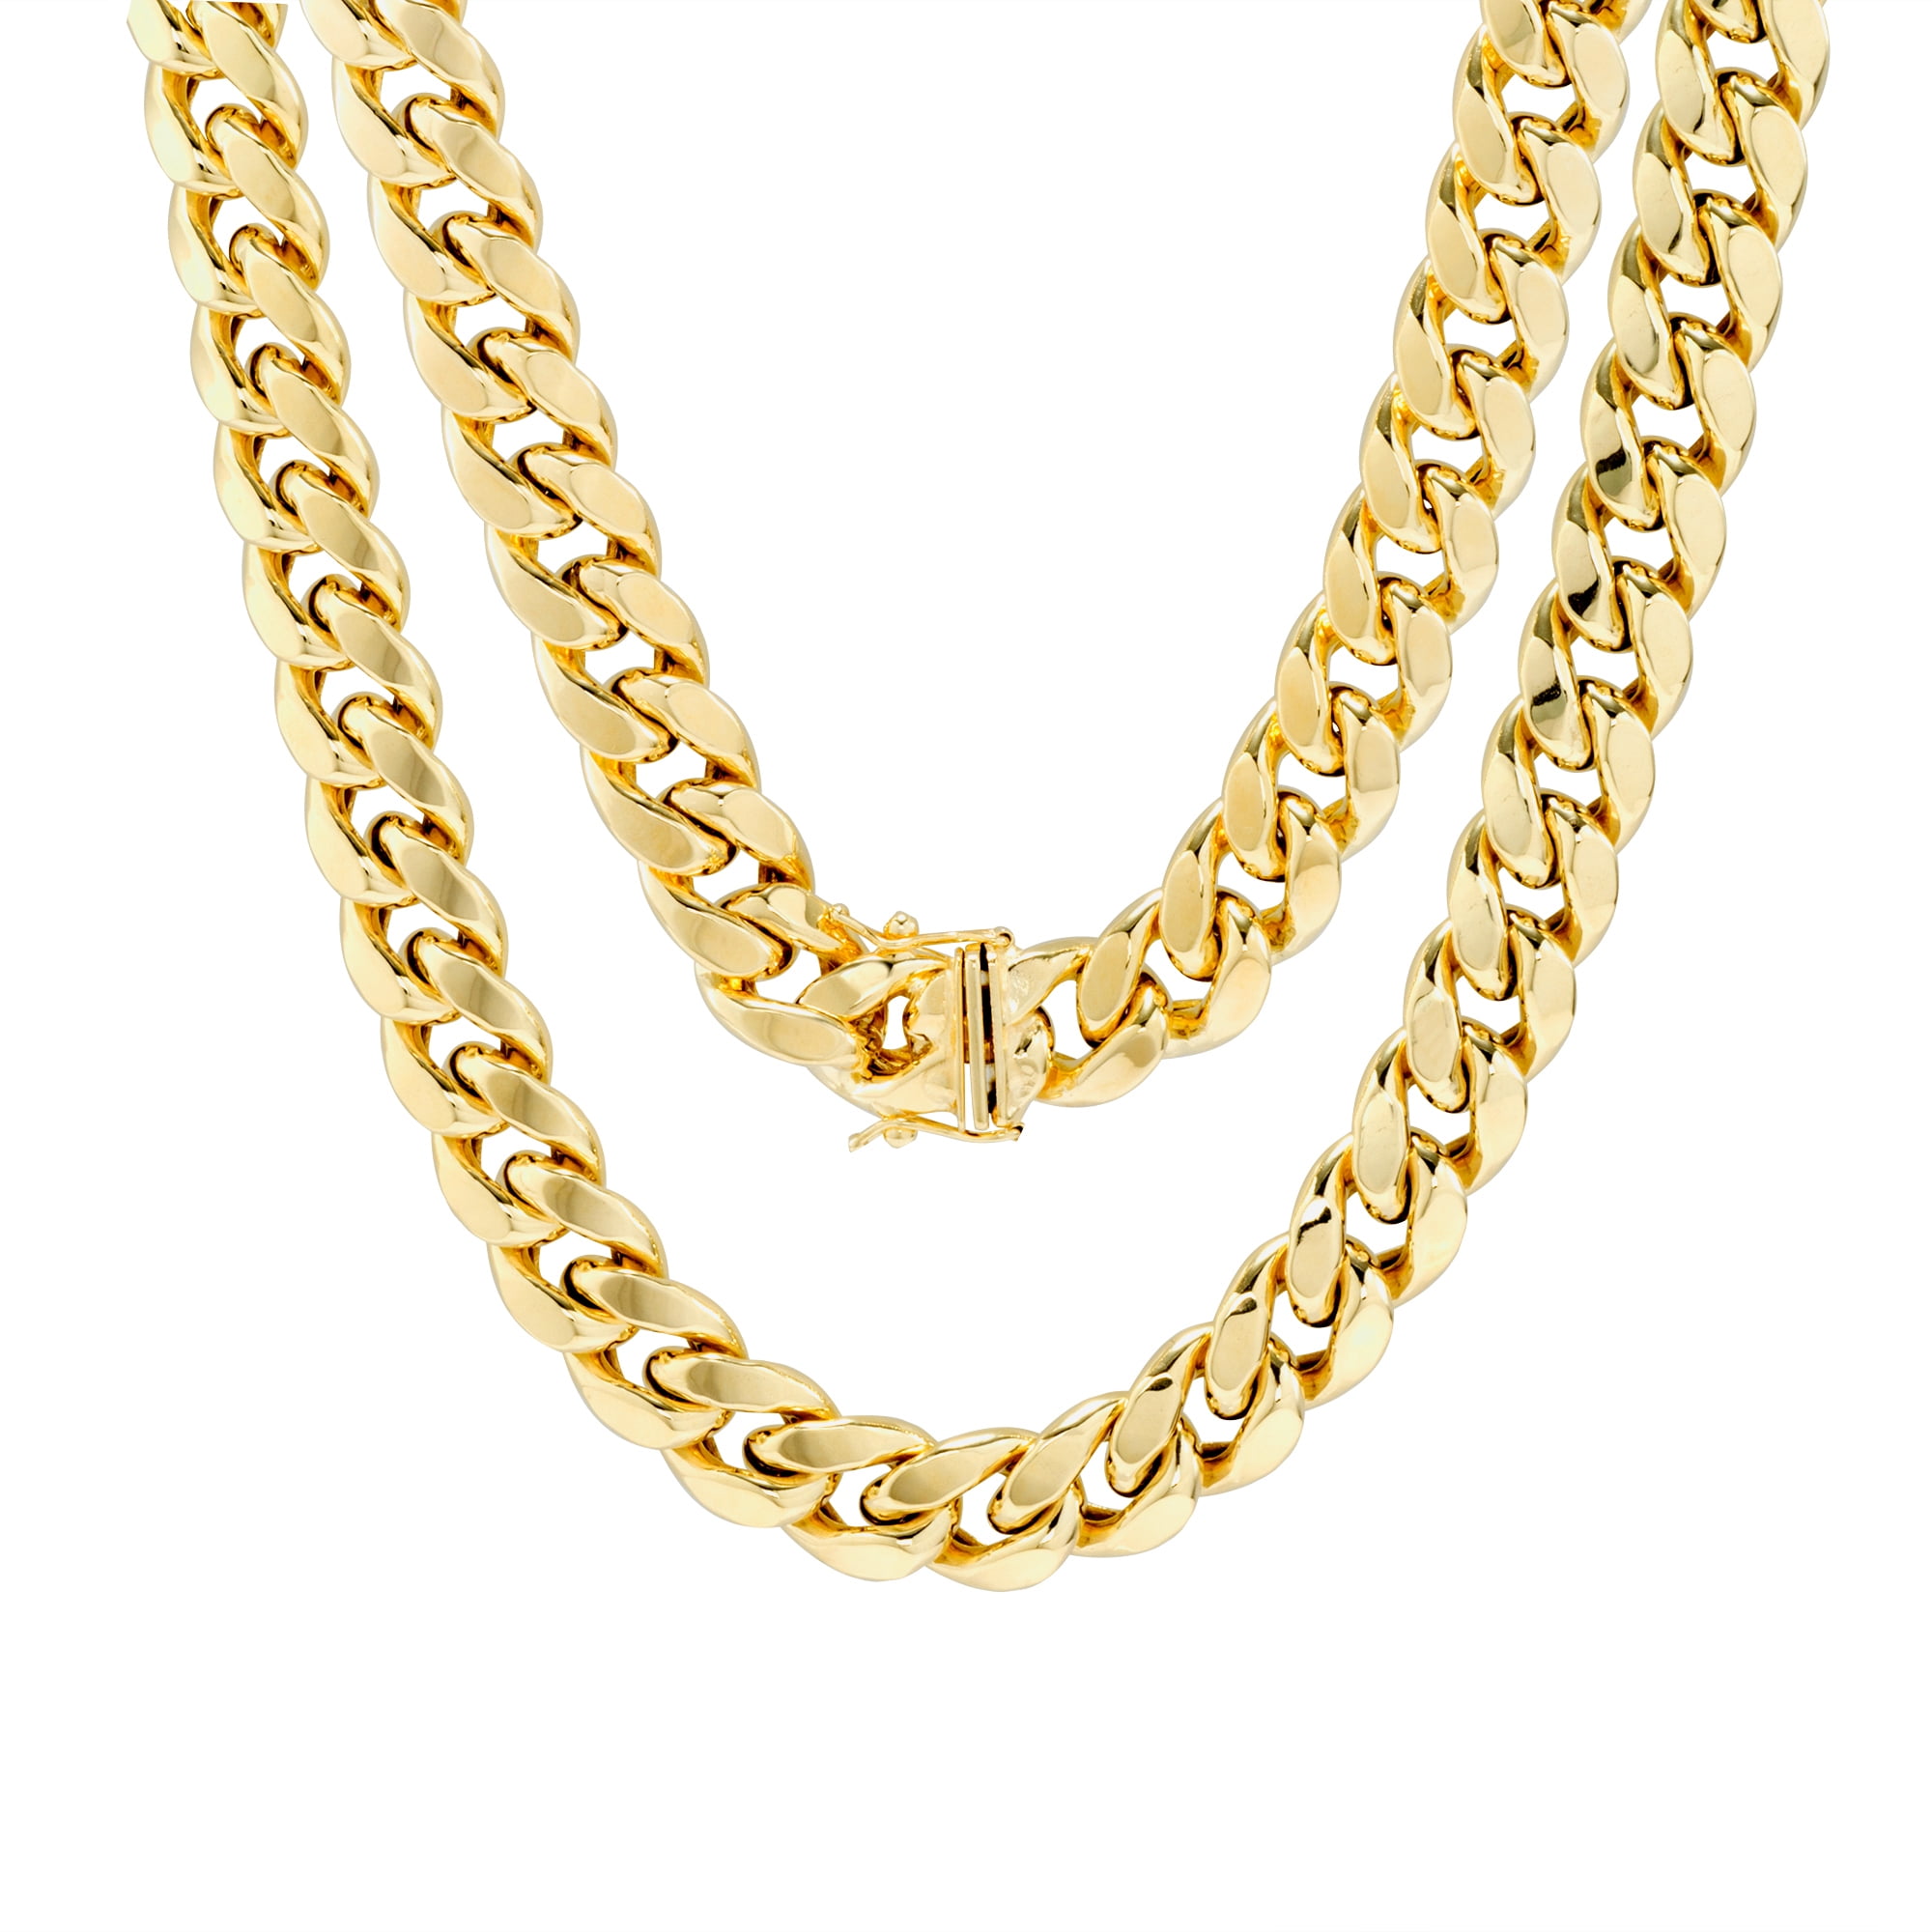 14k Solid Gold 2.7mm-6.1mm Miami Cuban Link Chain Necklace Men Women 20-30 inch 